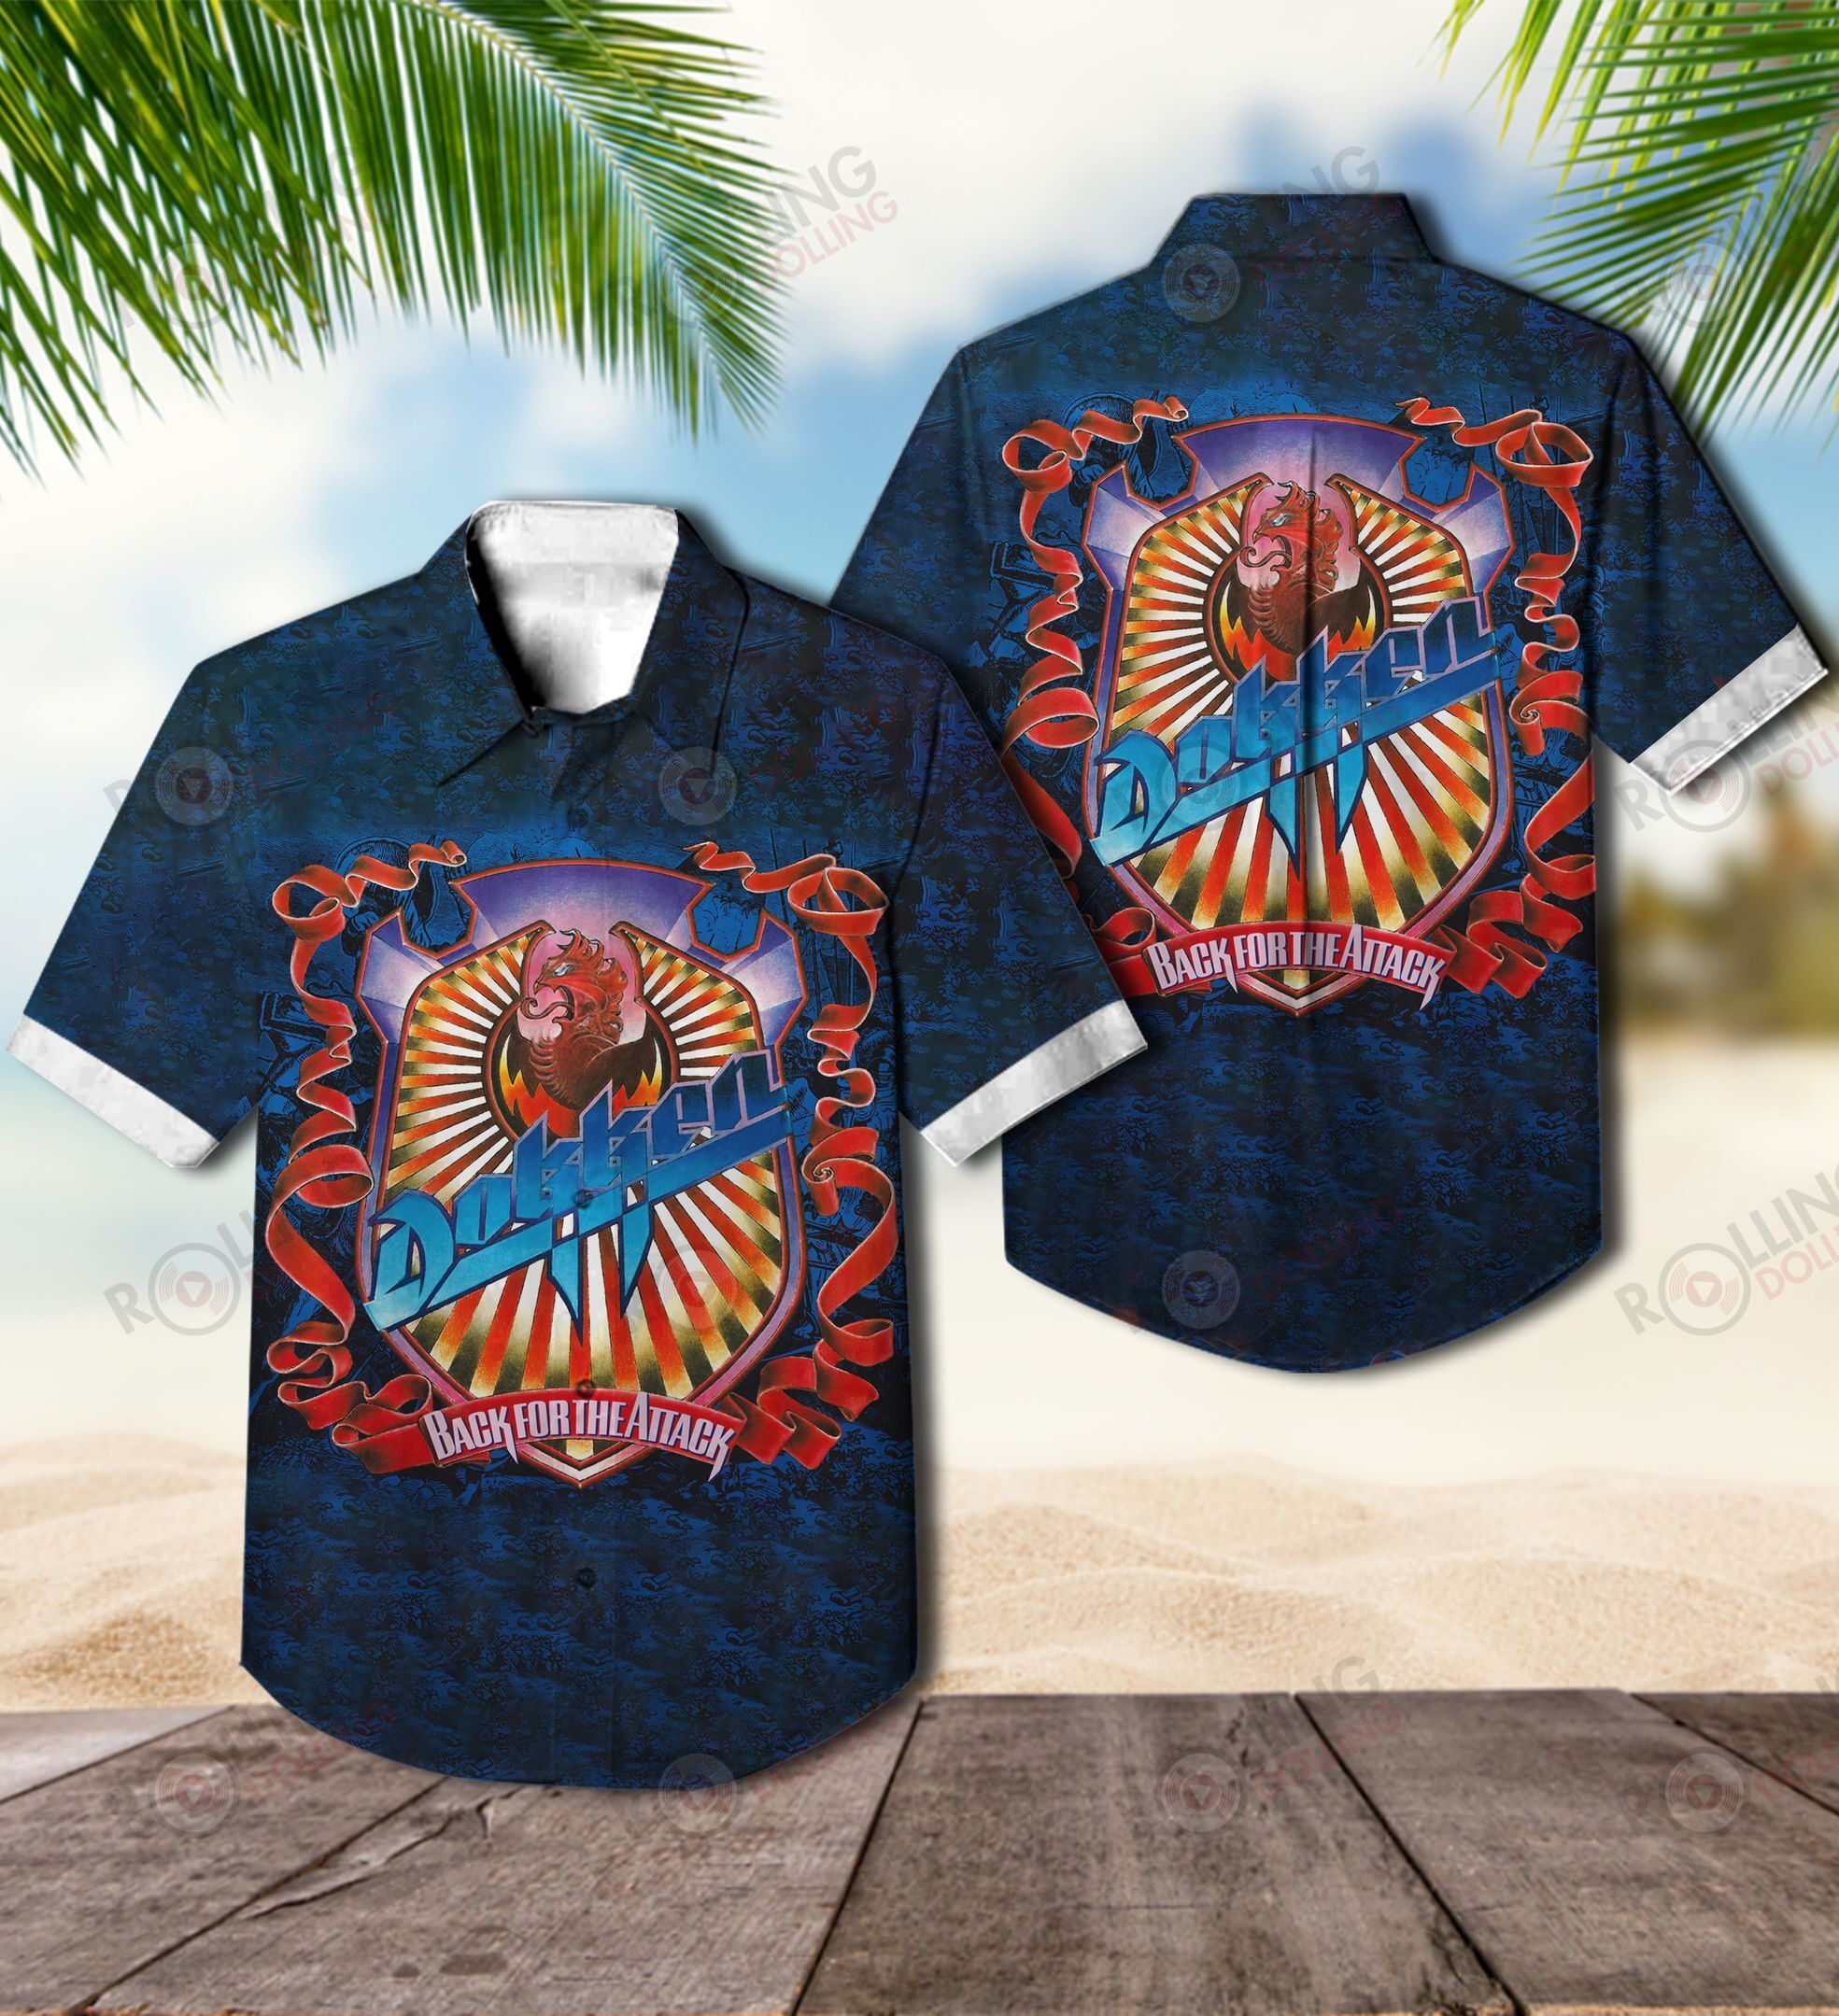 The Hawaiian Shirt is a popular shirt that is worn by Rock band fans 12